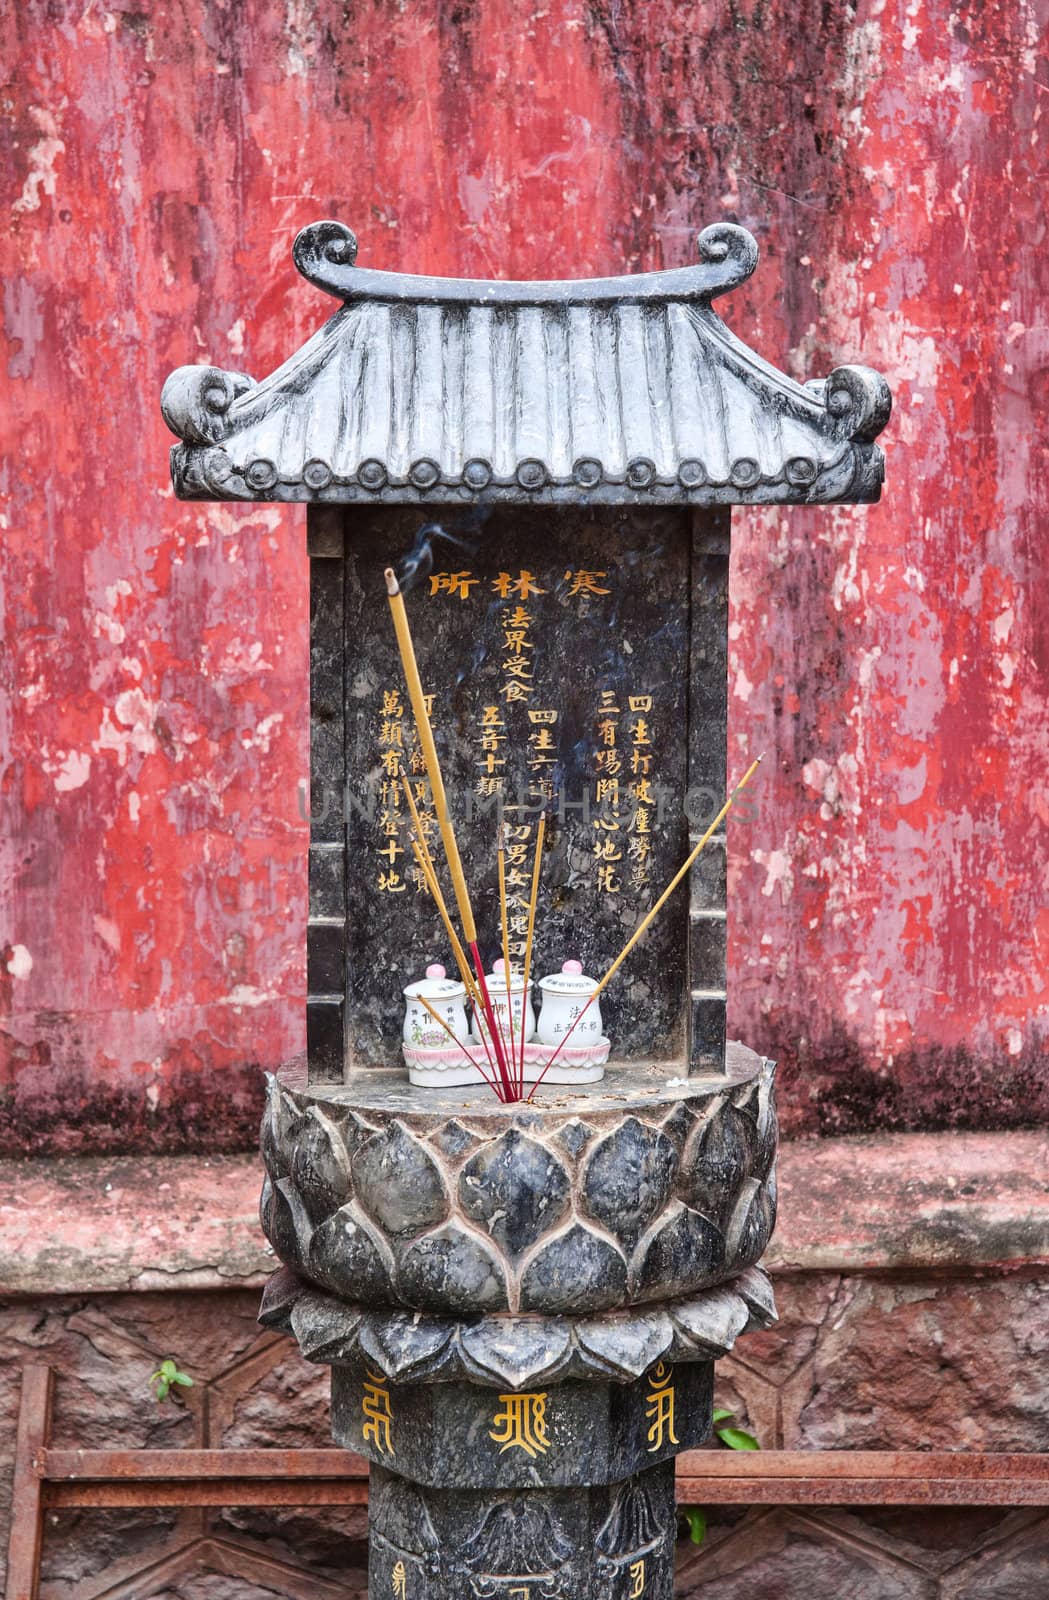 small buddhist shrine in vietnam by clearviewstock